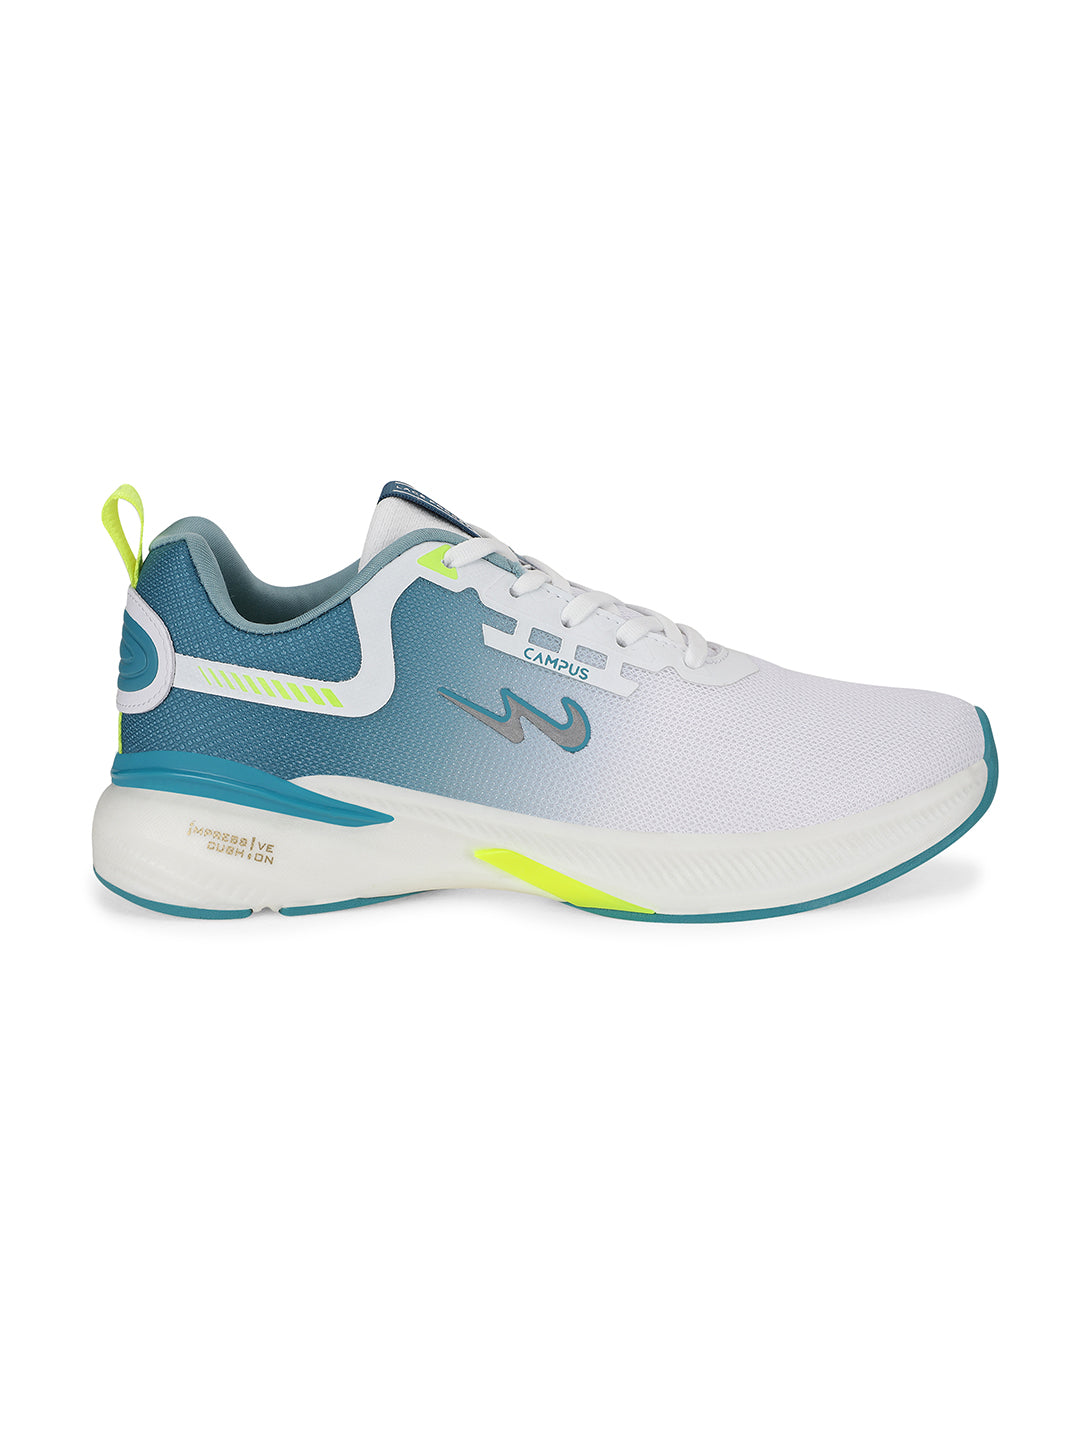 Buy Sports Shoes For Men: Chance-Wht-T-Blu